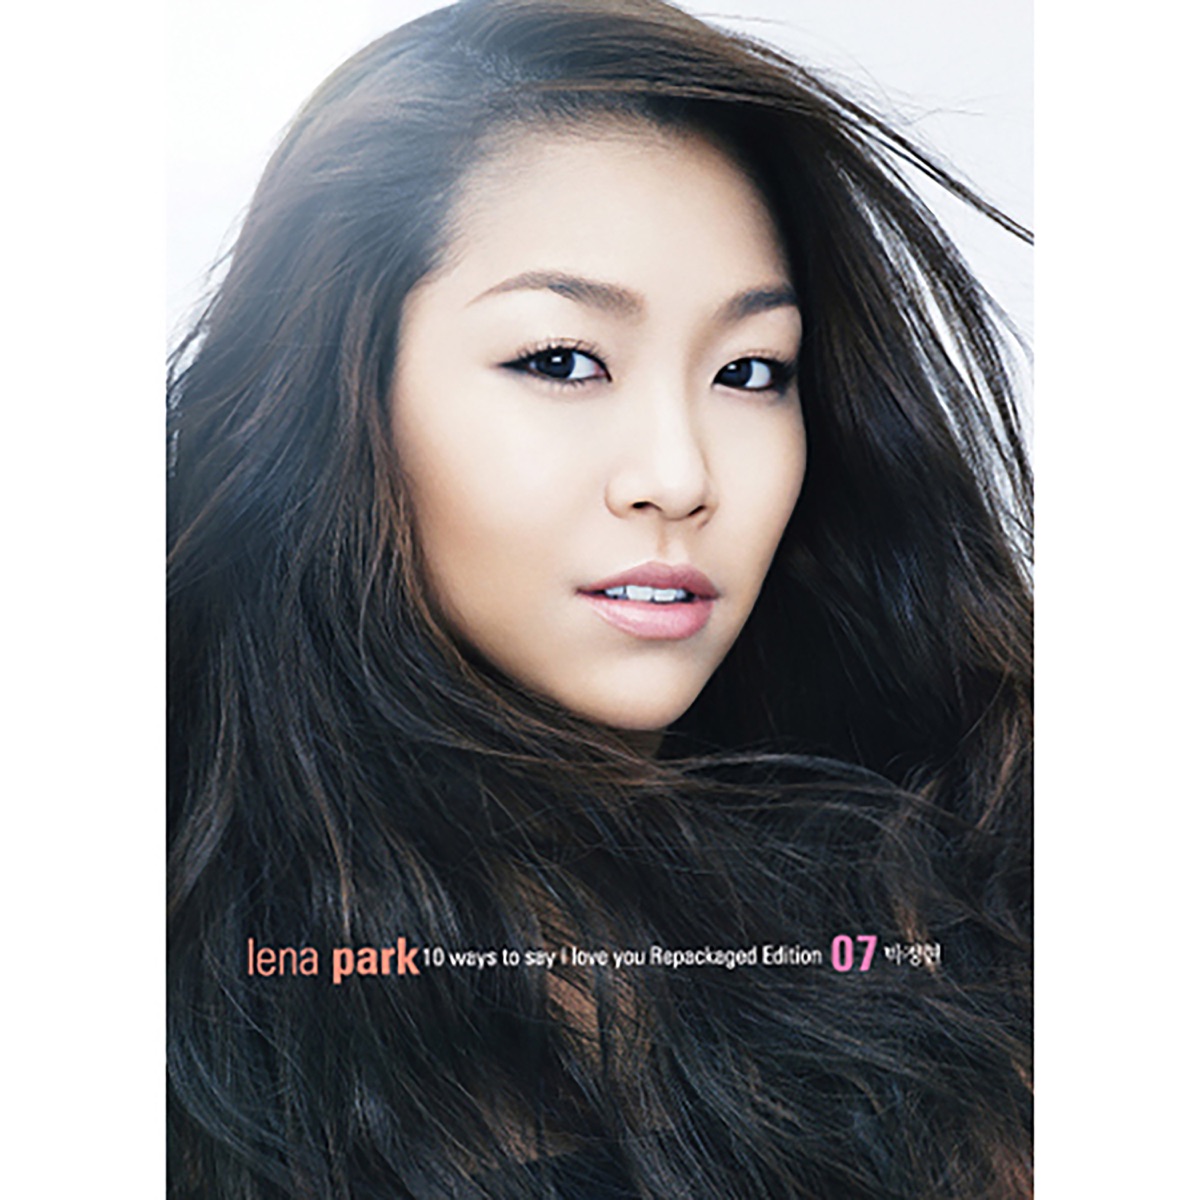 Lena Park – 10 Ways To Say I Love You [Repackaged Edtion]